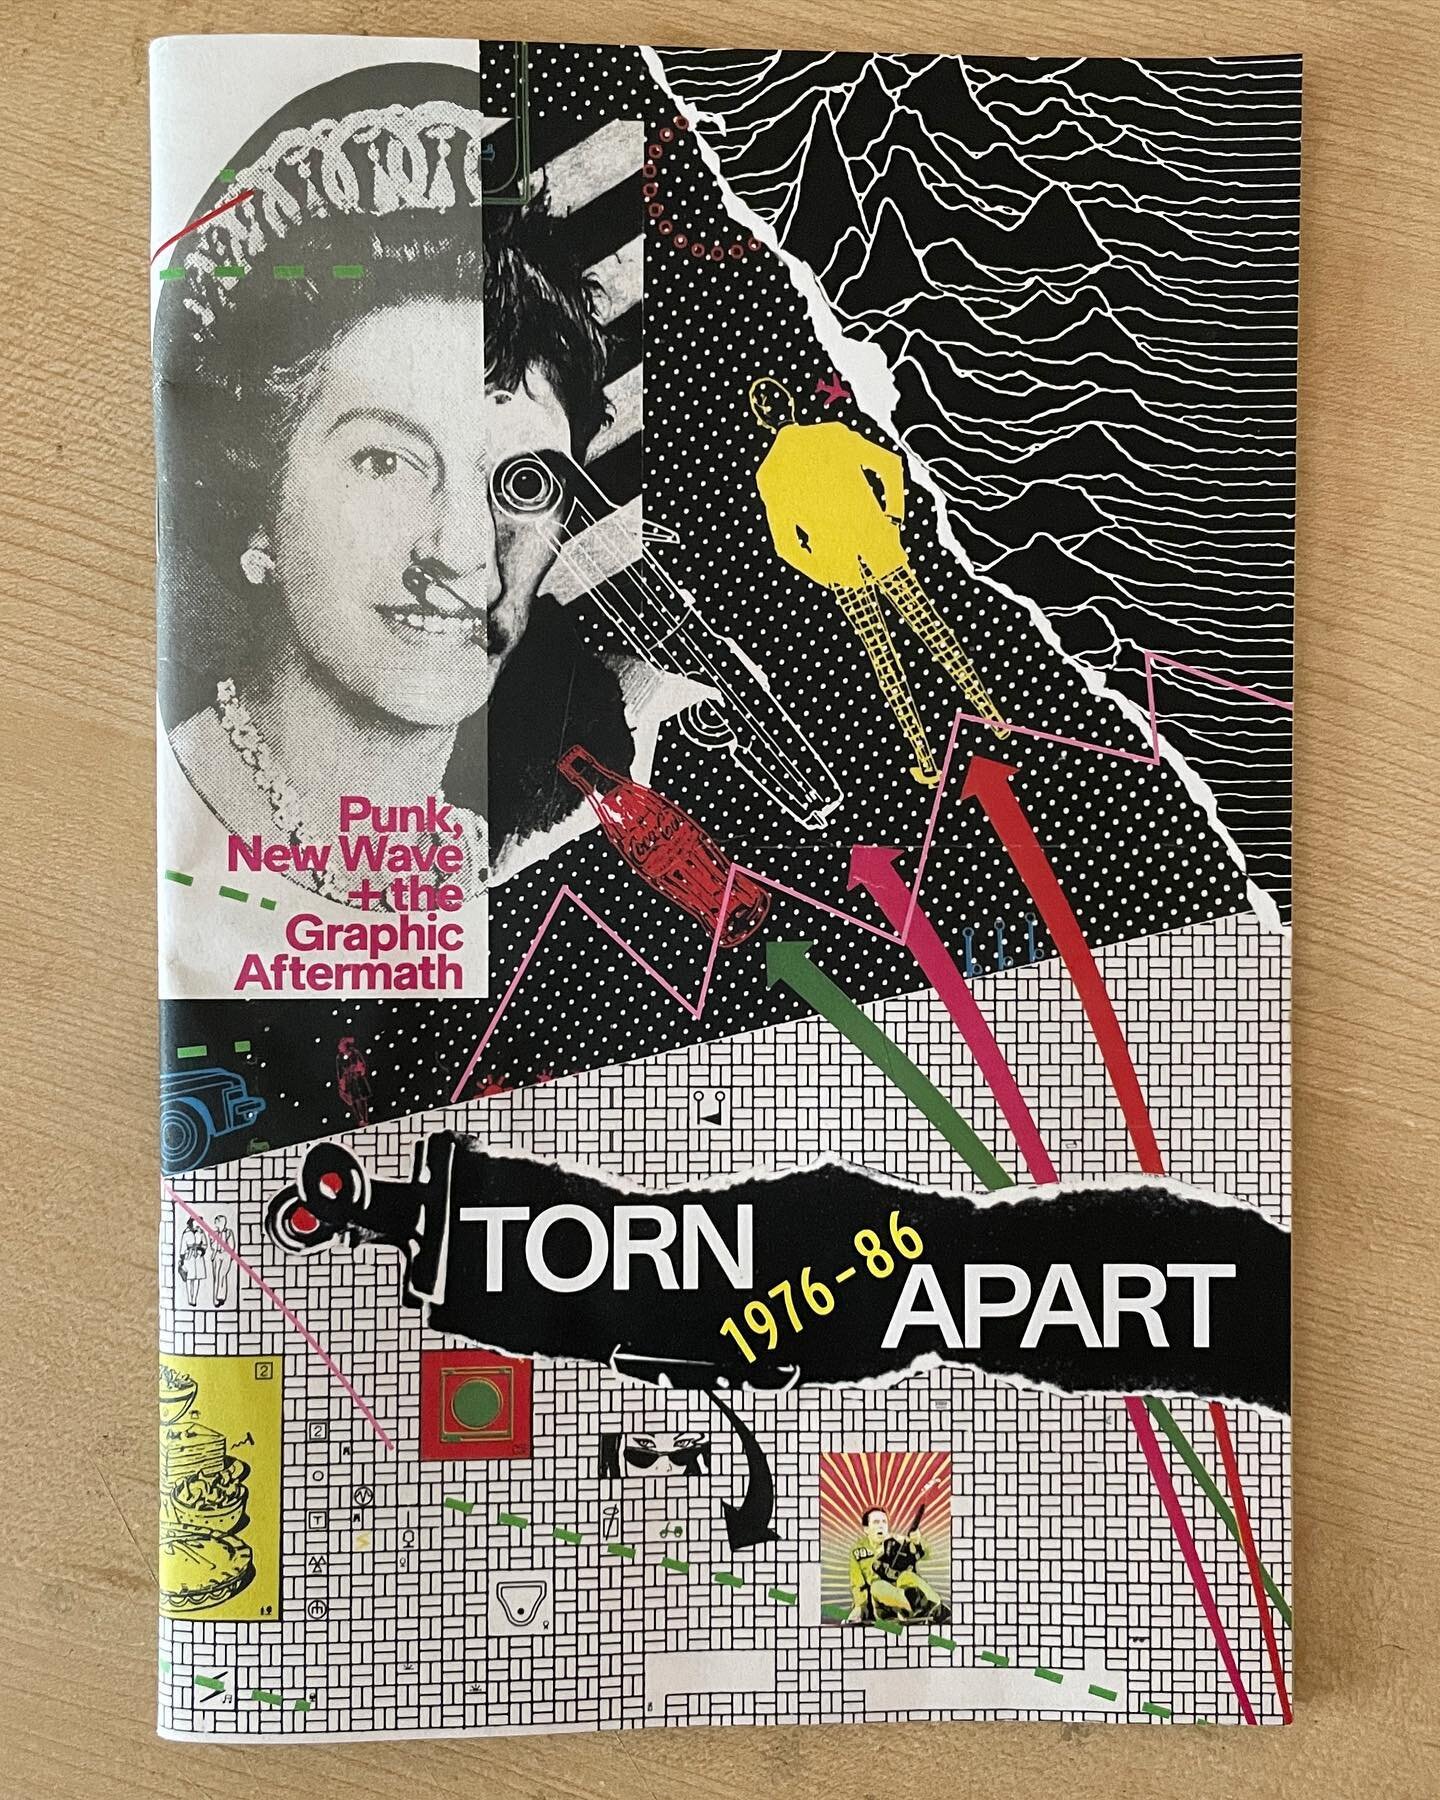 On the final day of Torn Apart, Simon Reynolds will be giving a gallery talk, &ldquo;A Different Kind of Tension: The Sound and the Look of New Wave&rdquo; at 6pm. 

It will be followed by a closing reception from 7-9pm. Come join us as we wrap up th